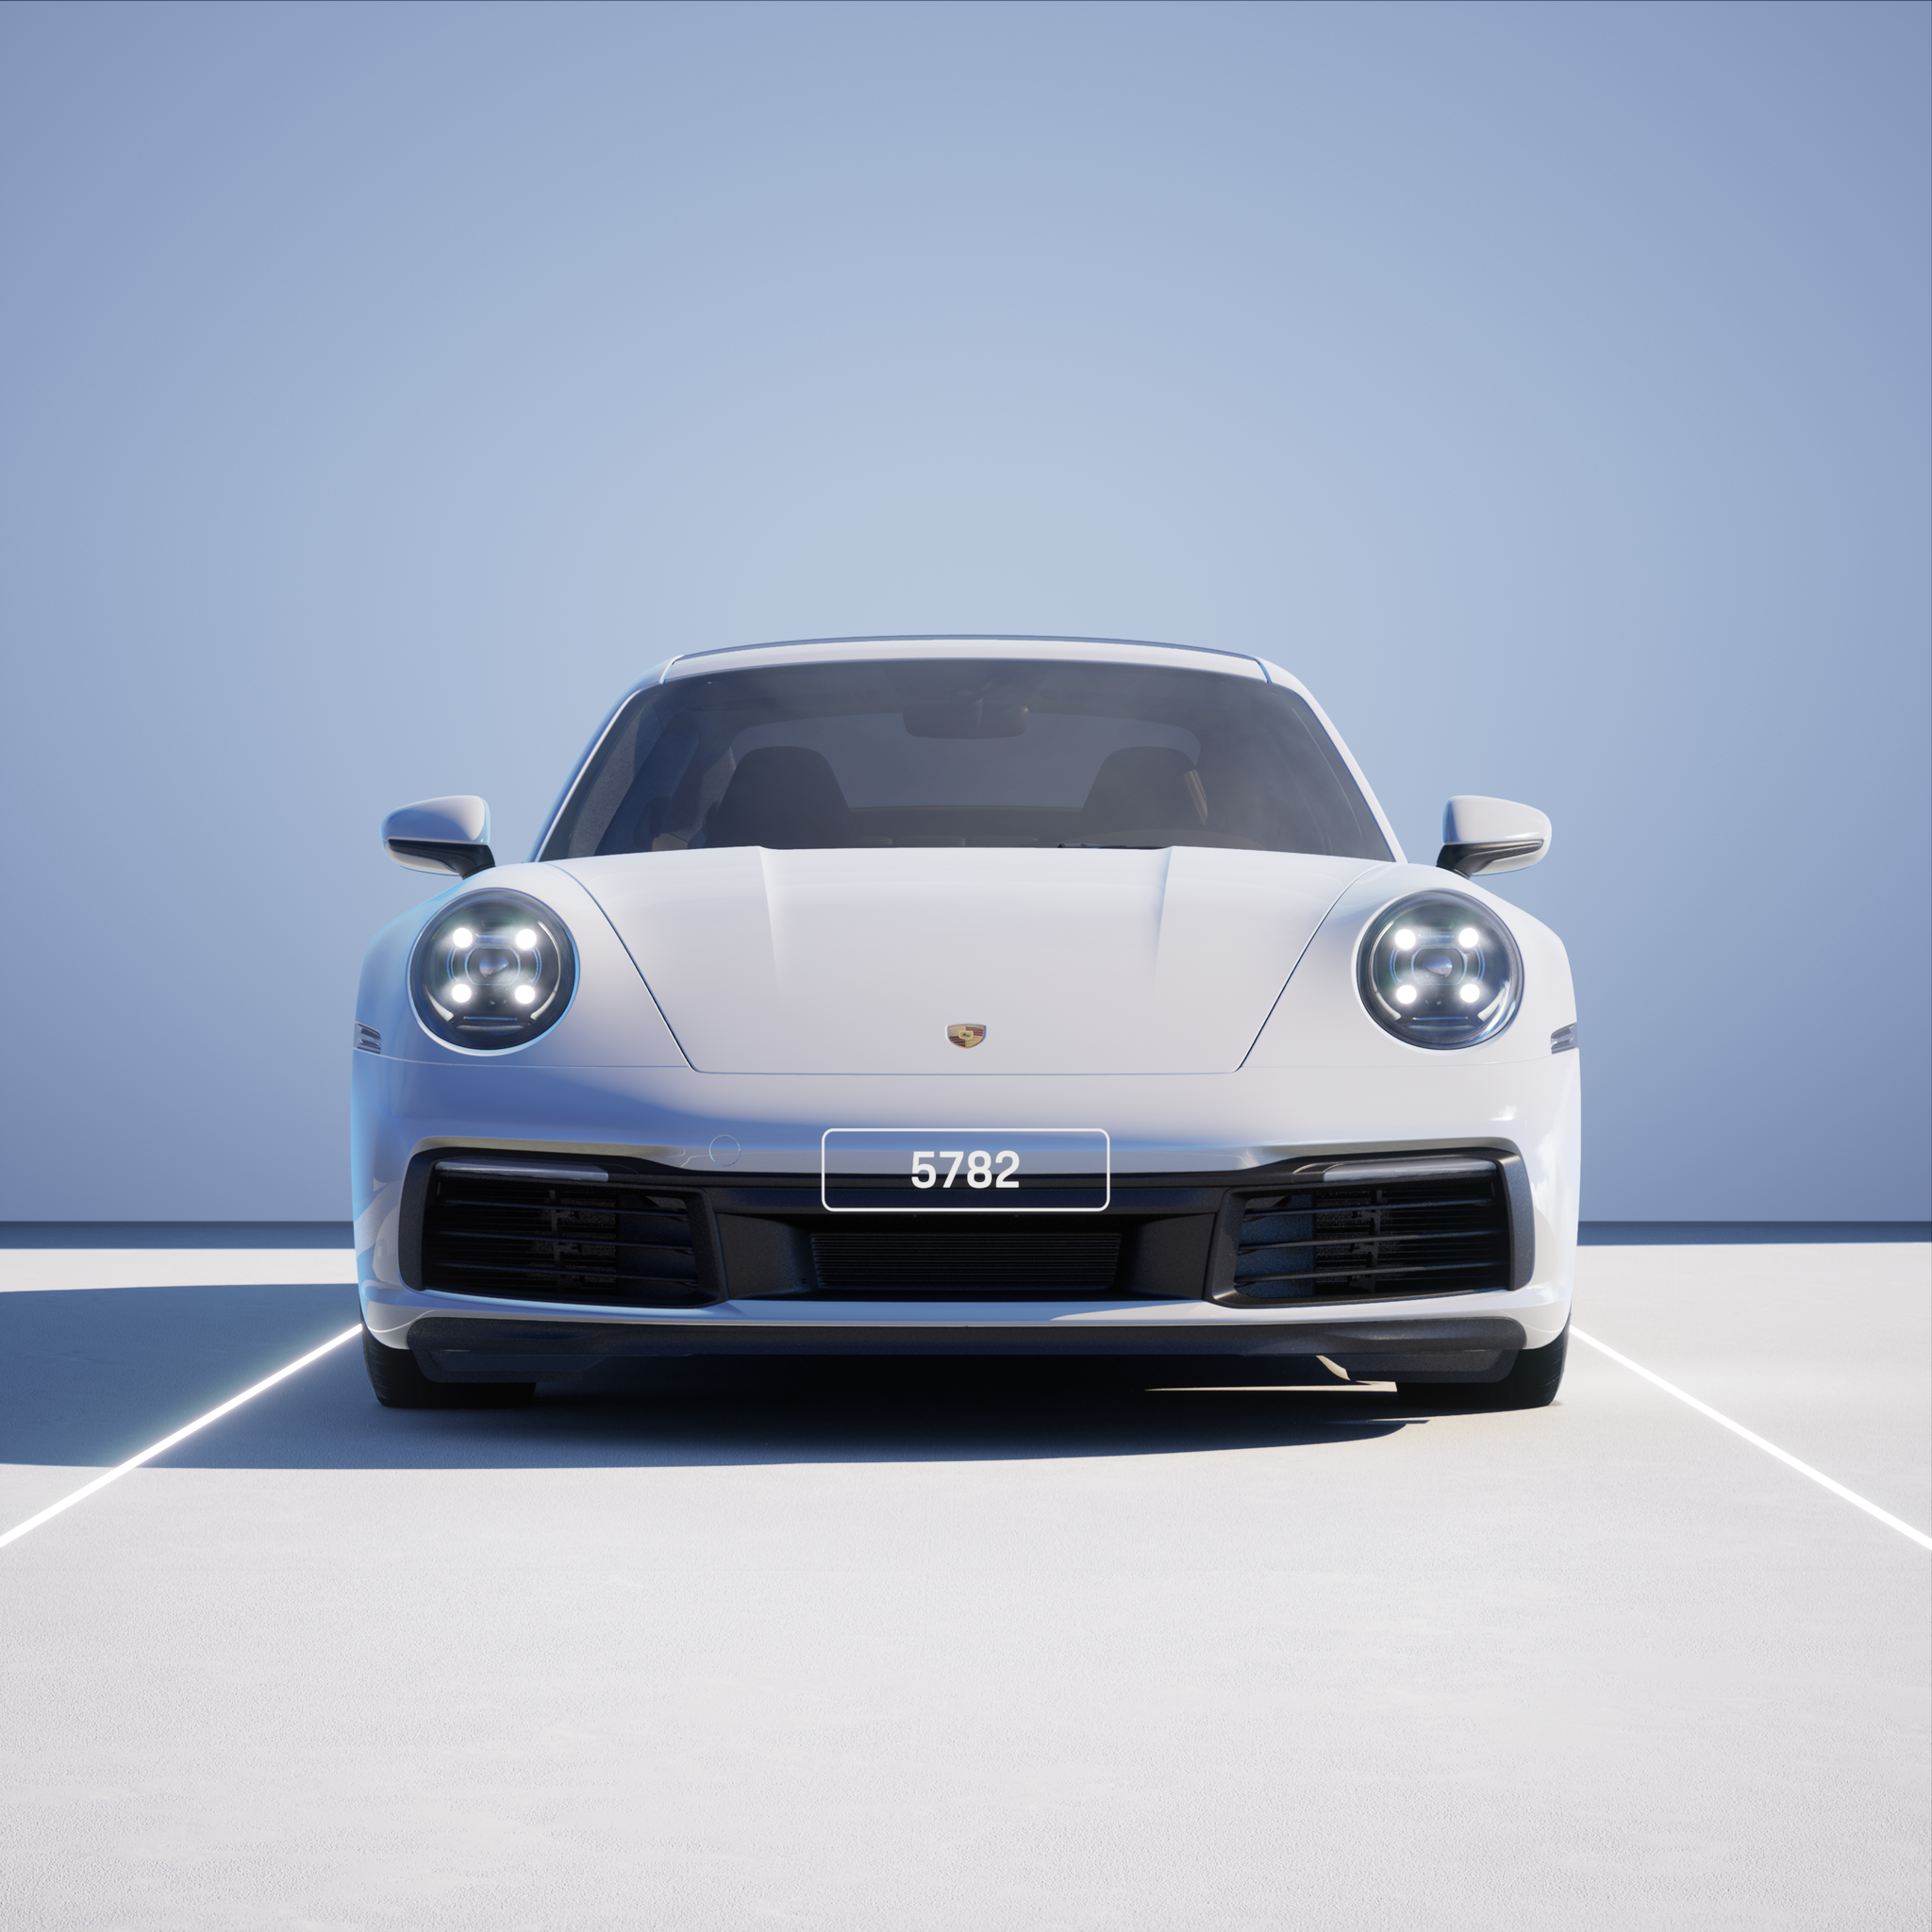 The PORSCHΞ 911 5782 image in phase